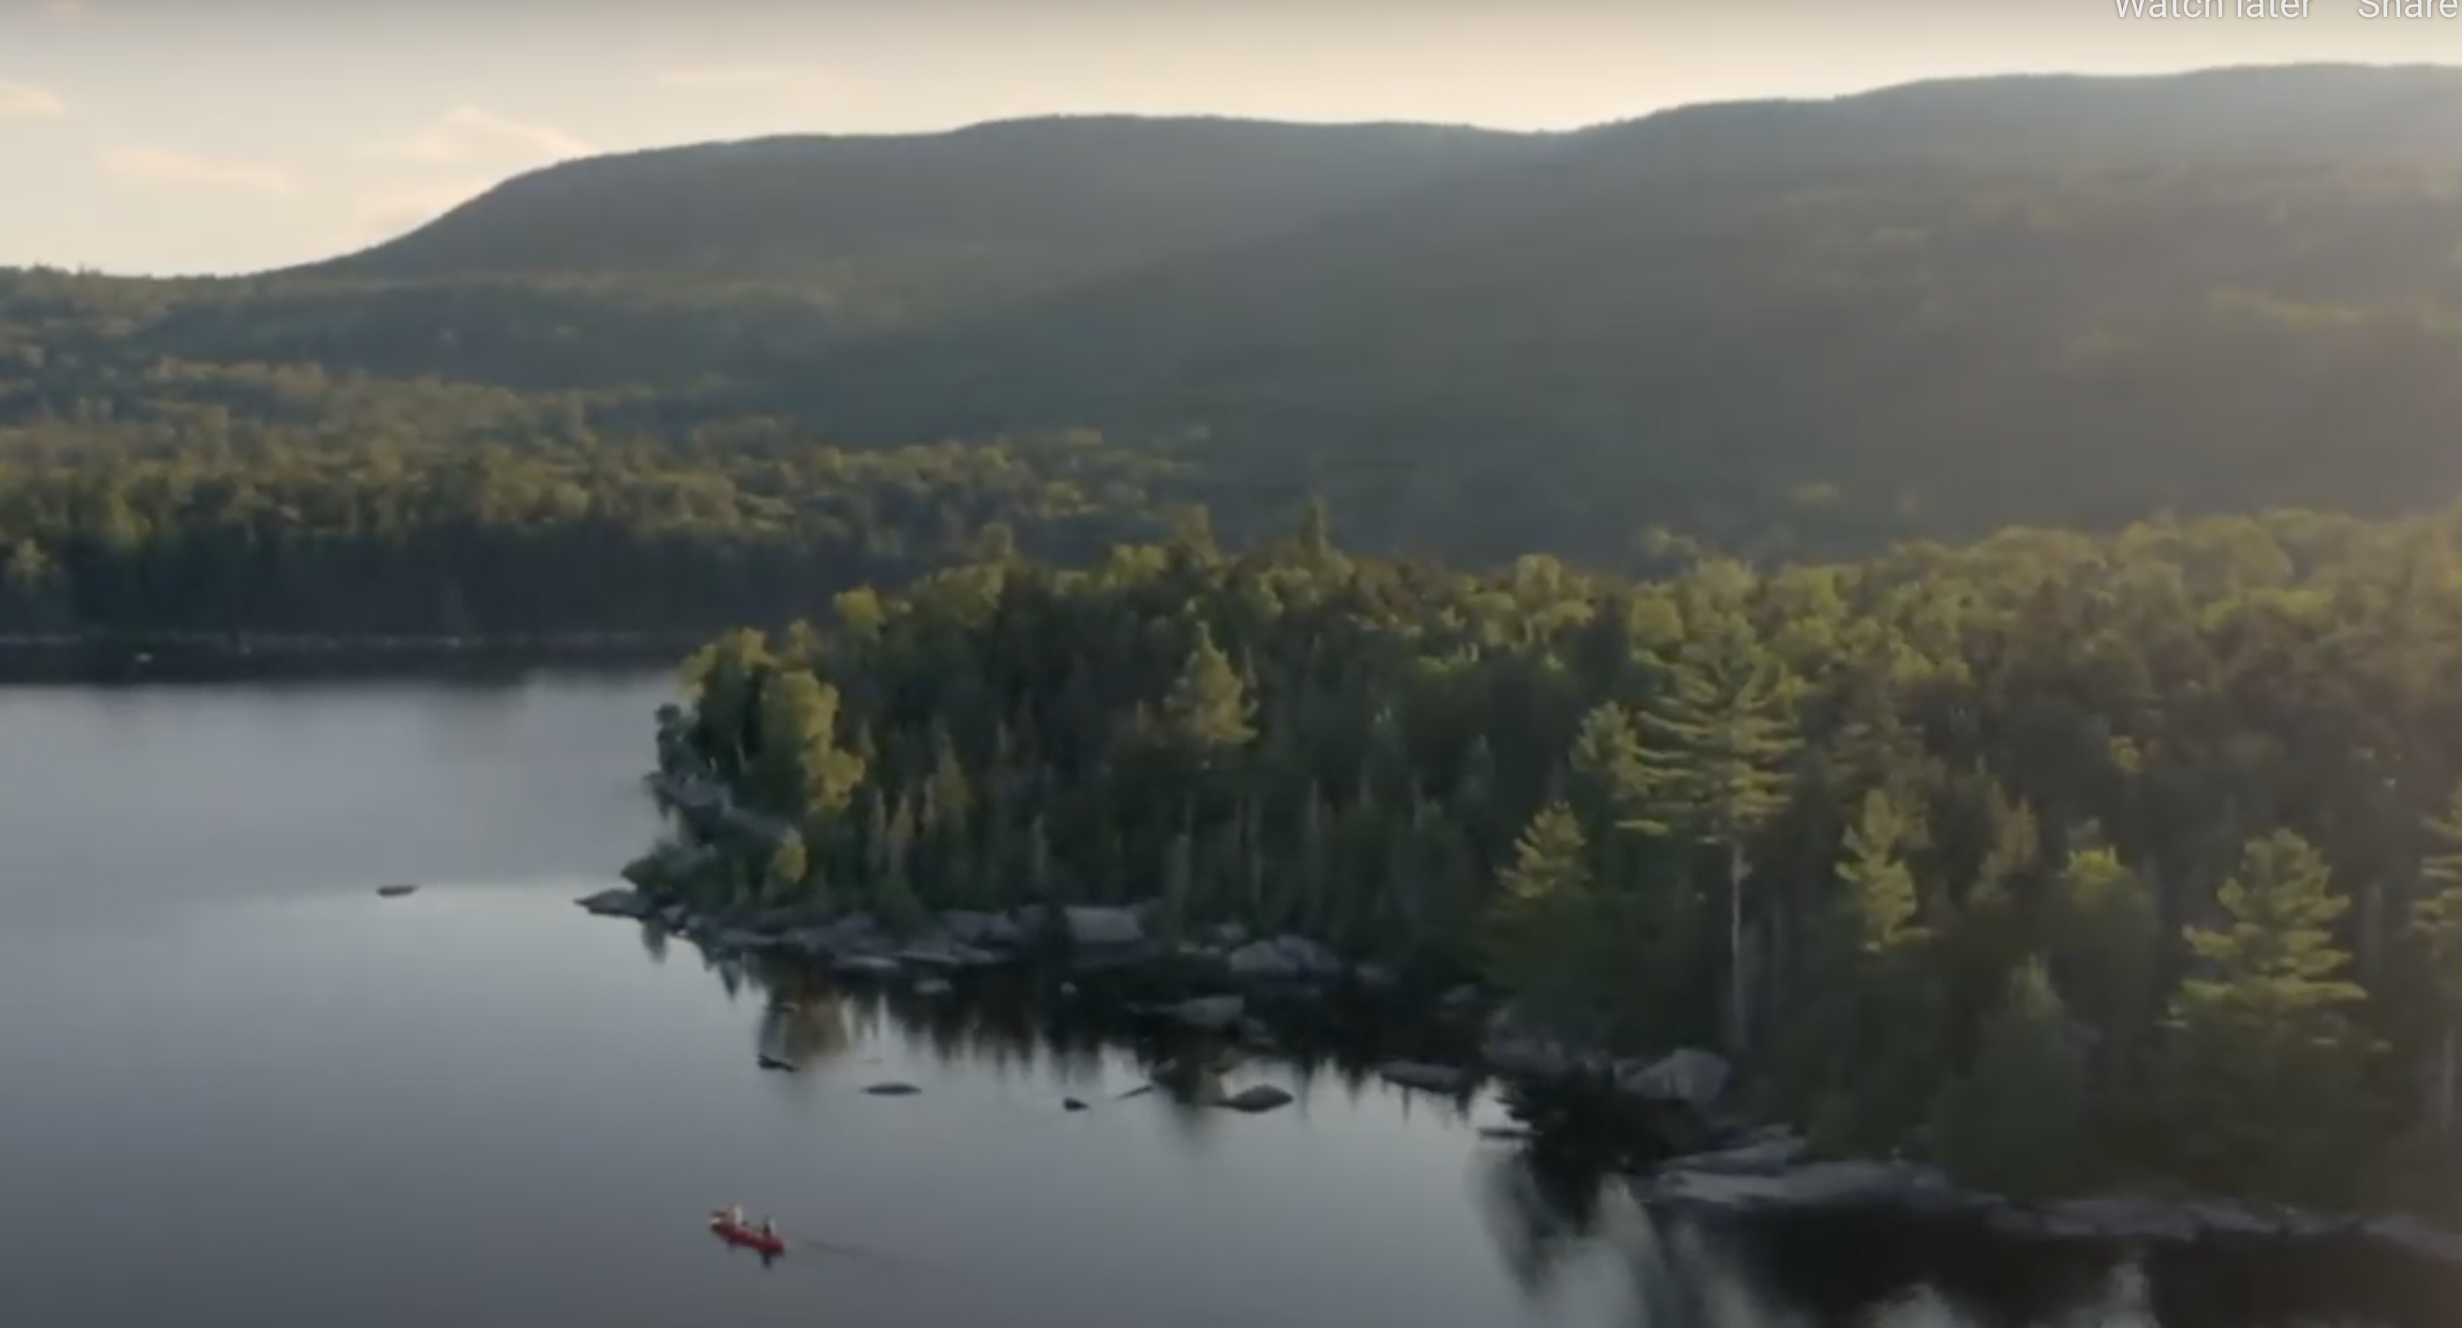 An aerial view of a lake with a canoe on it.